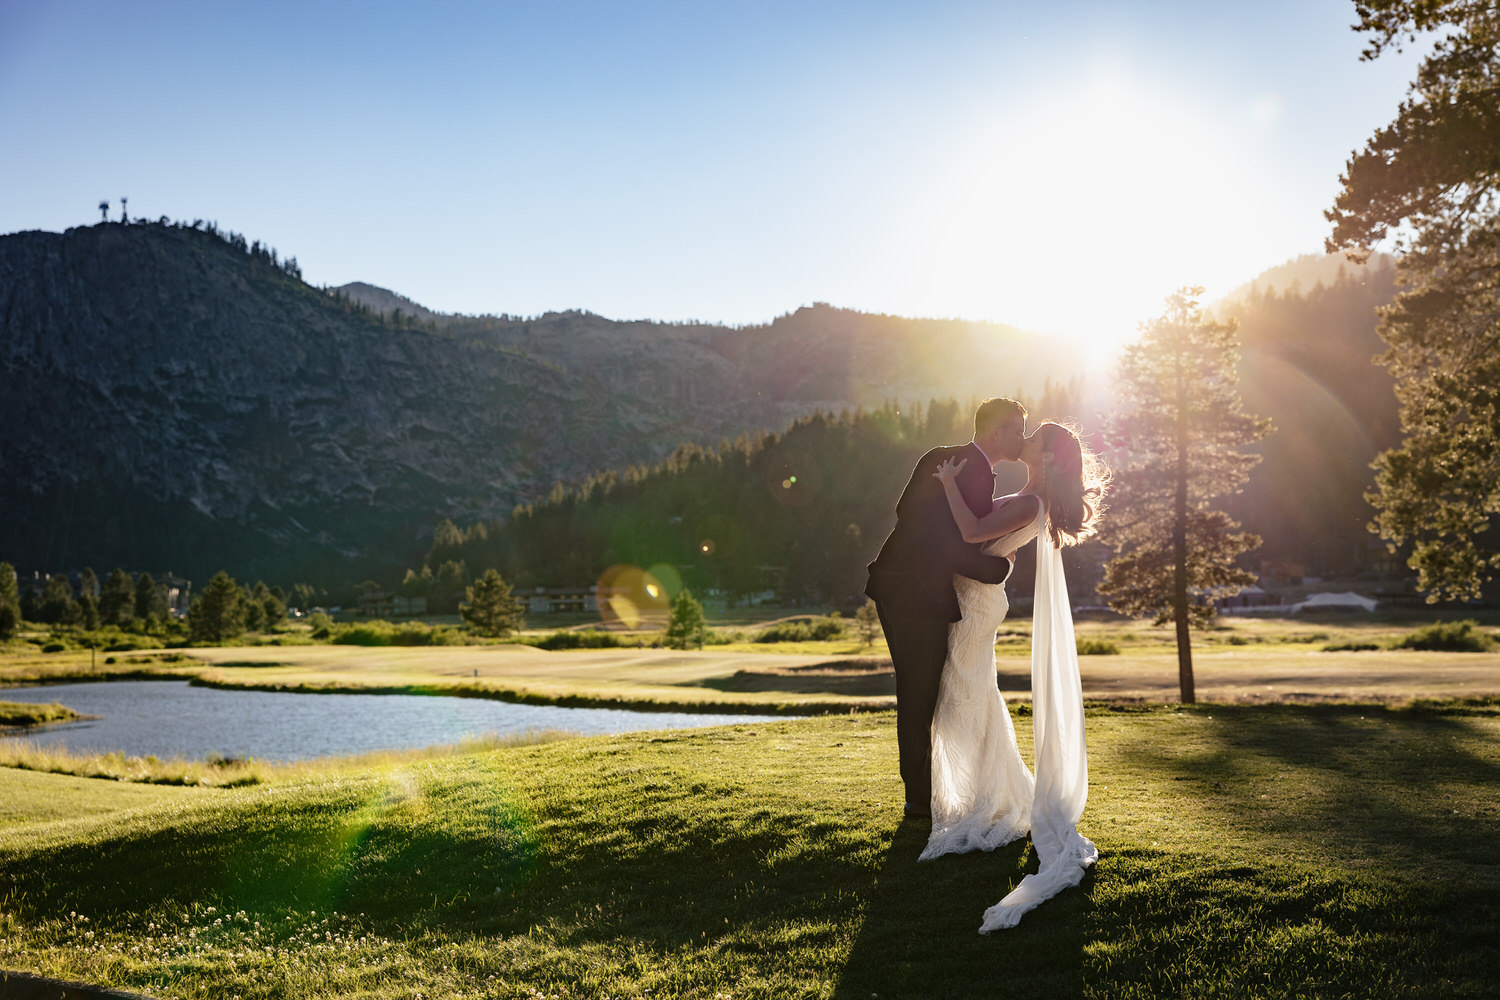 Summertime wedding at Everline Resort & Spa. Bride and groom kissing on the edge of the golf course as the sun sets behind the mountains.